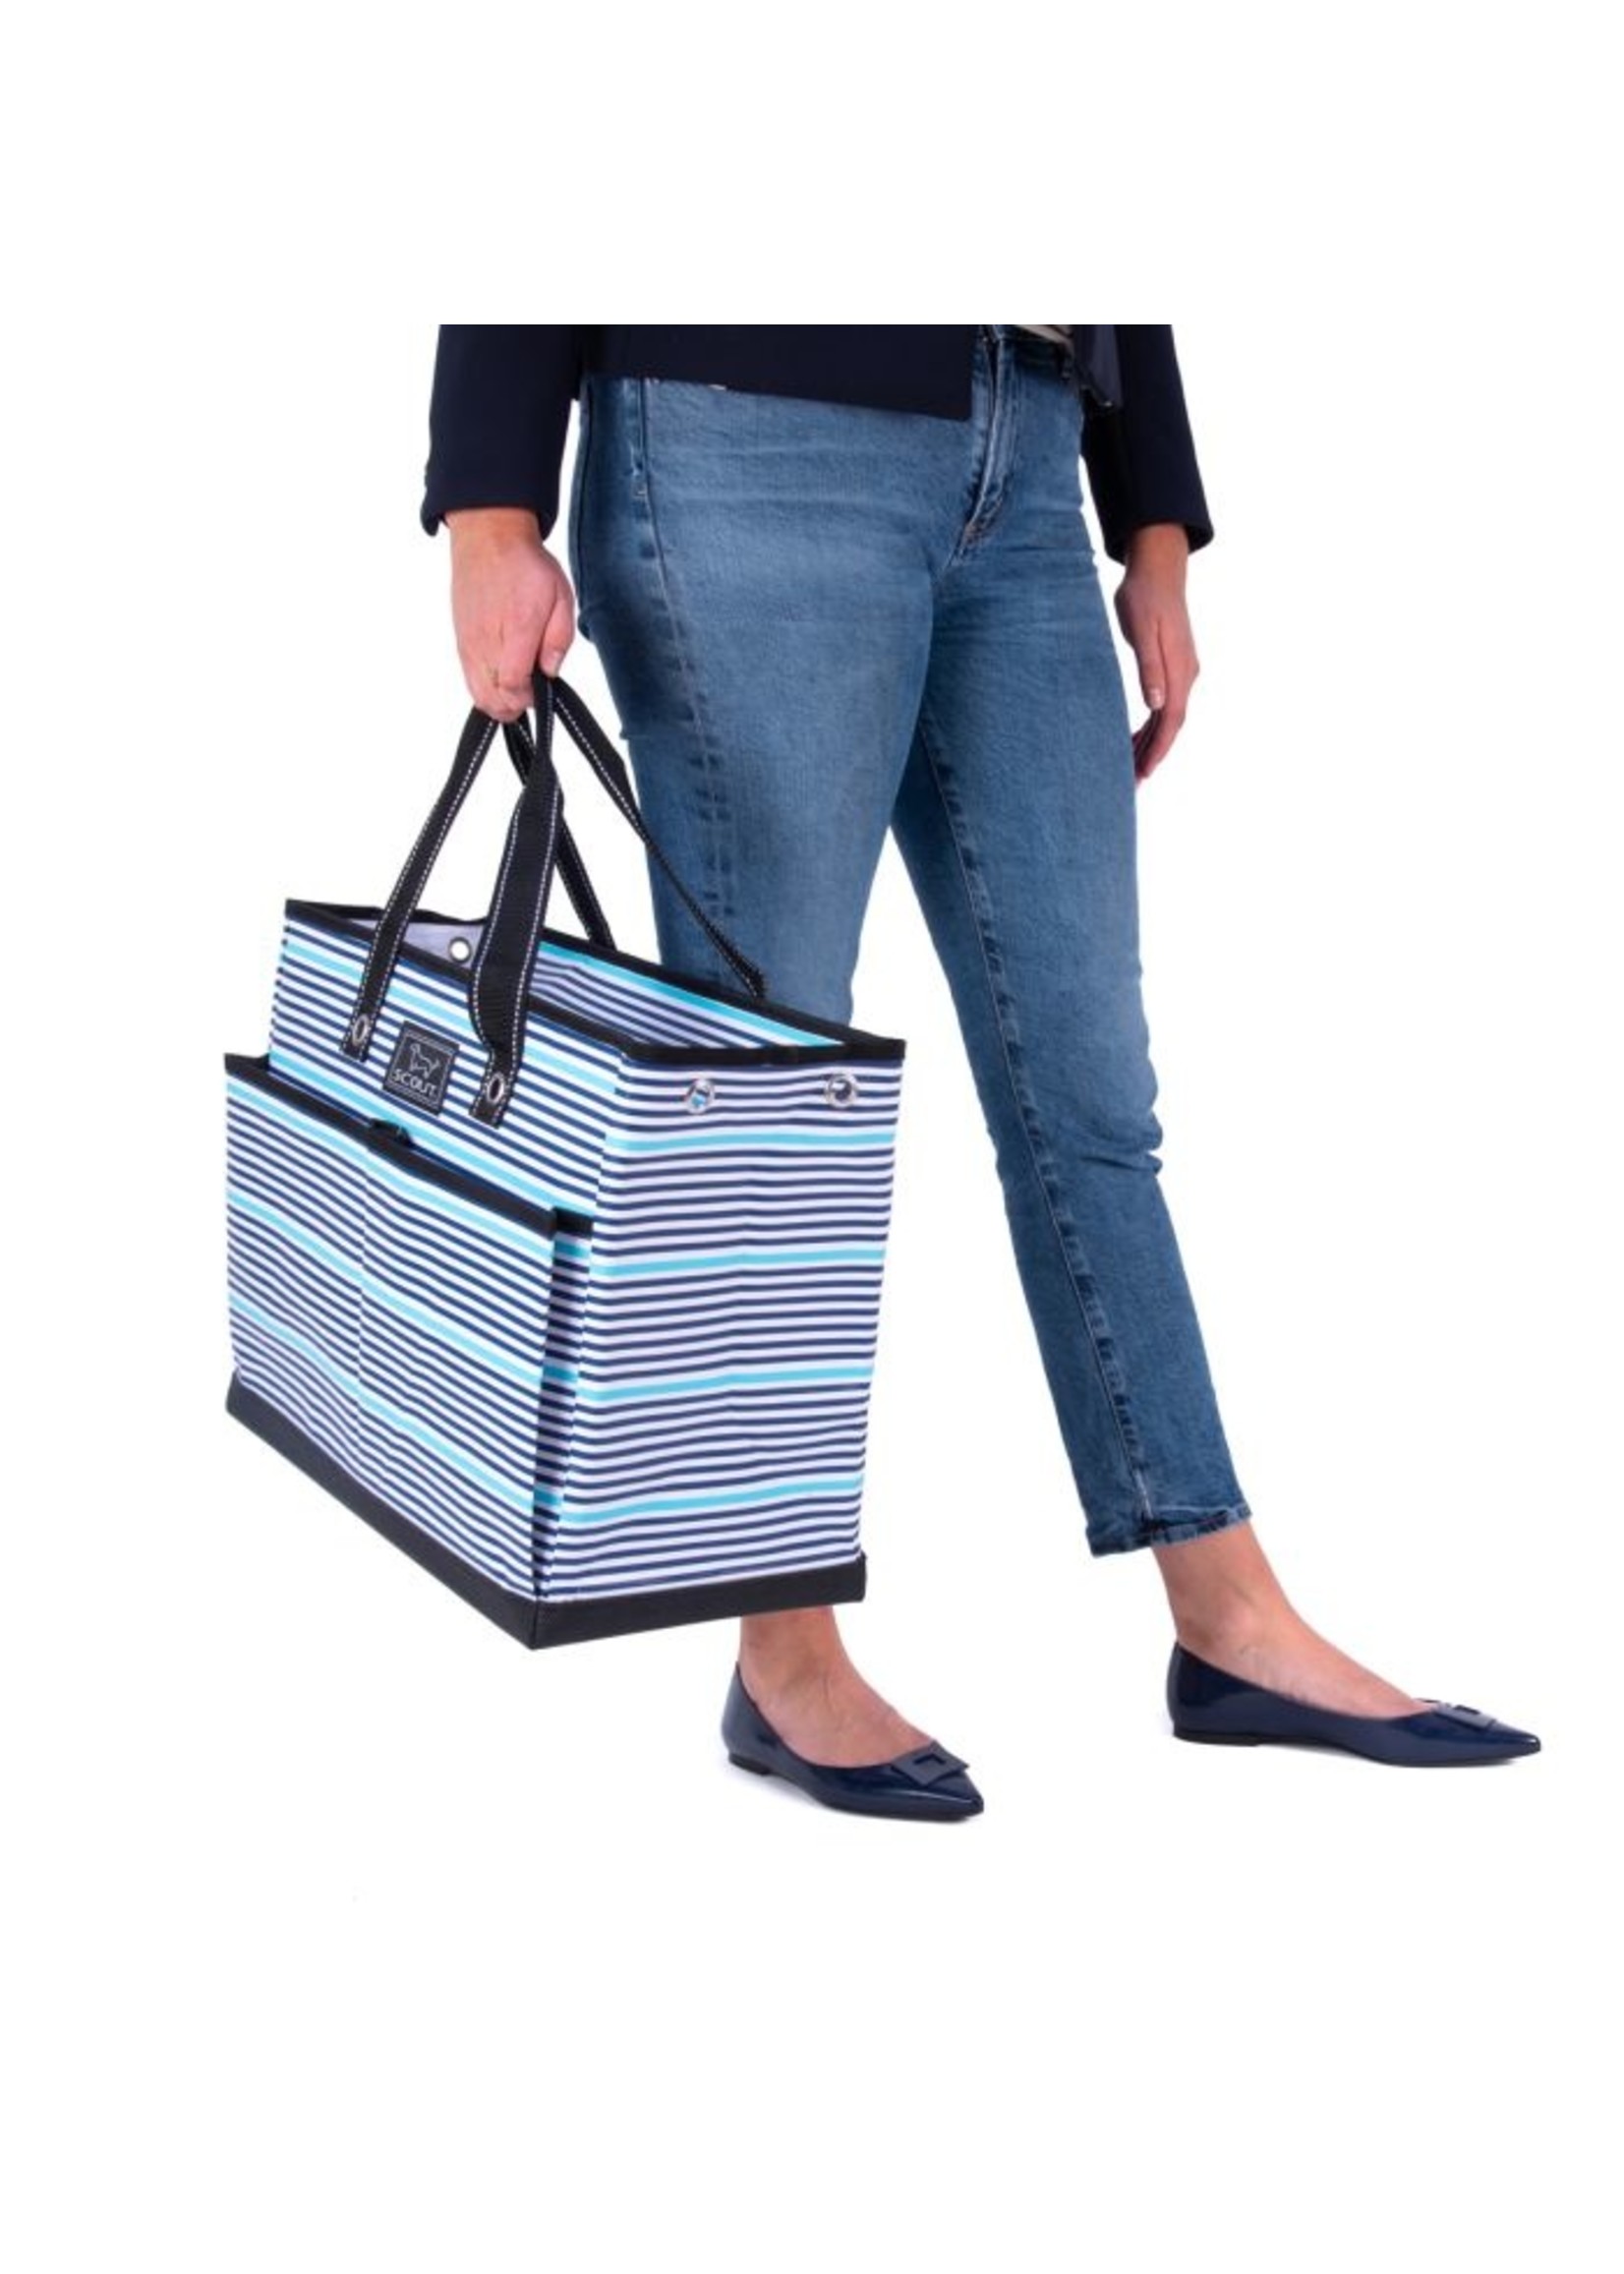 scout by bungalow Scout The BJ Bag Sea Island Stripe